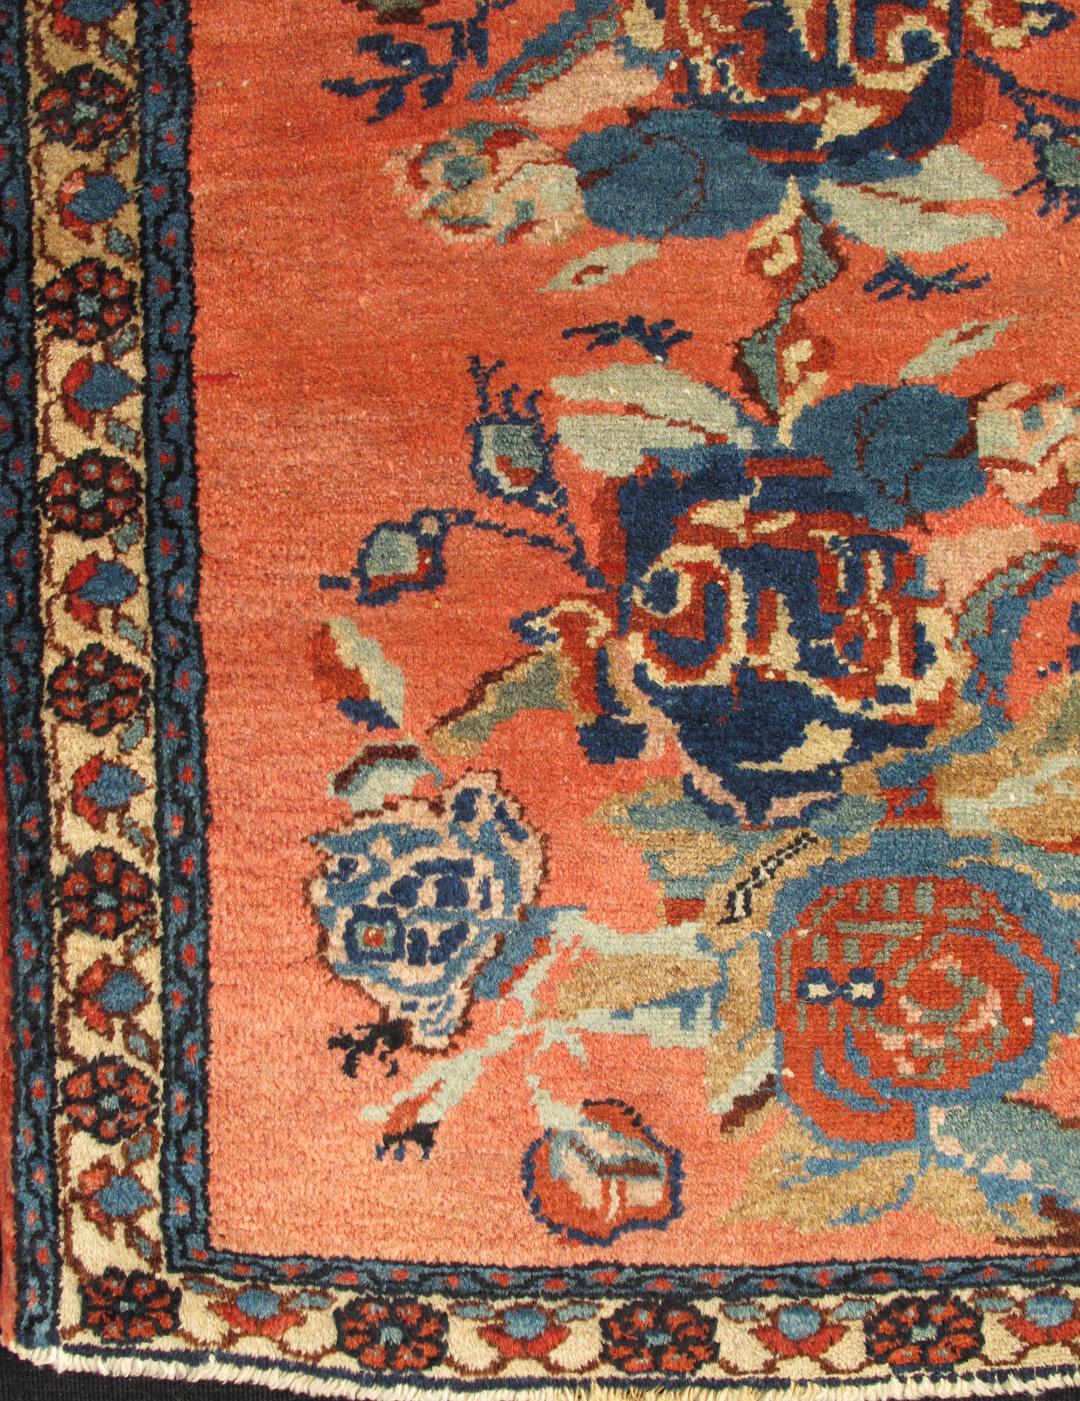 With bouquets of colorful flowers in multi-colors rug/E-0912 origin/Iran.

Inspired by antique Caucasian Karabagh, this handwoven rug features a large bouquet of flowers in the central field. The bouquets are brought to life on a faint red